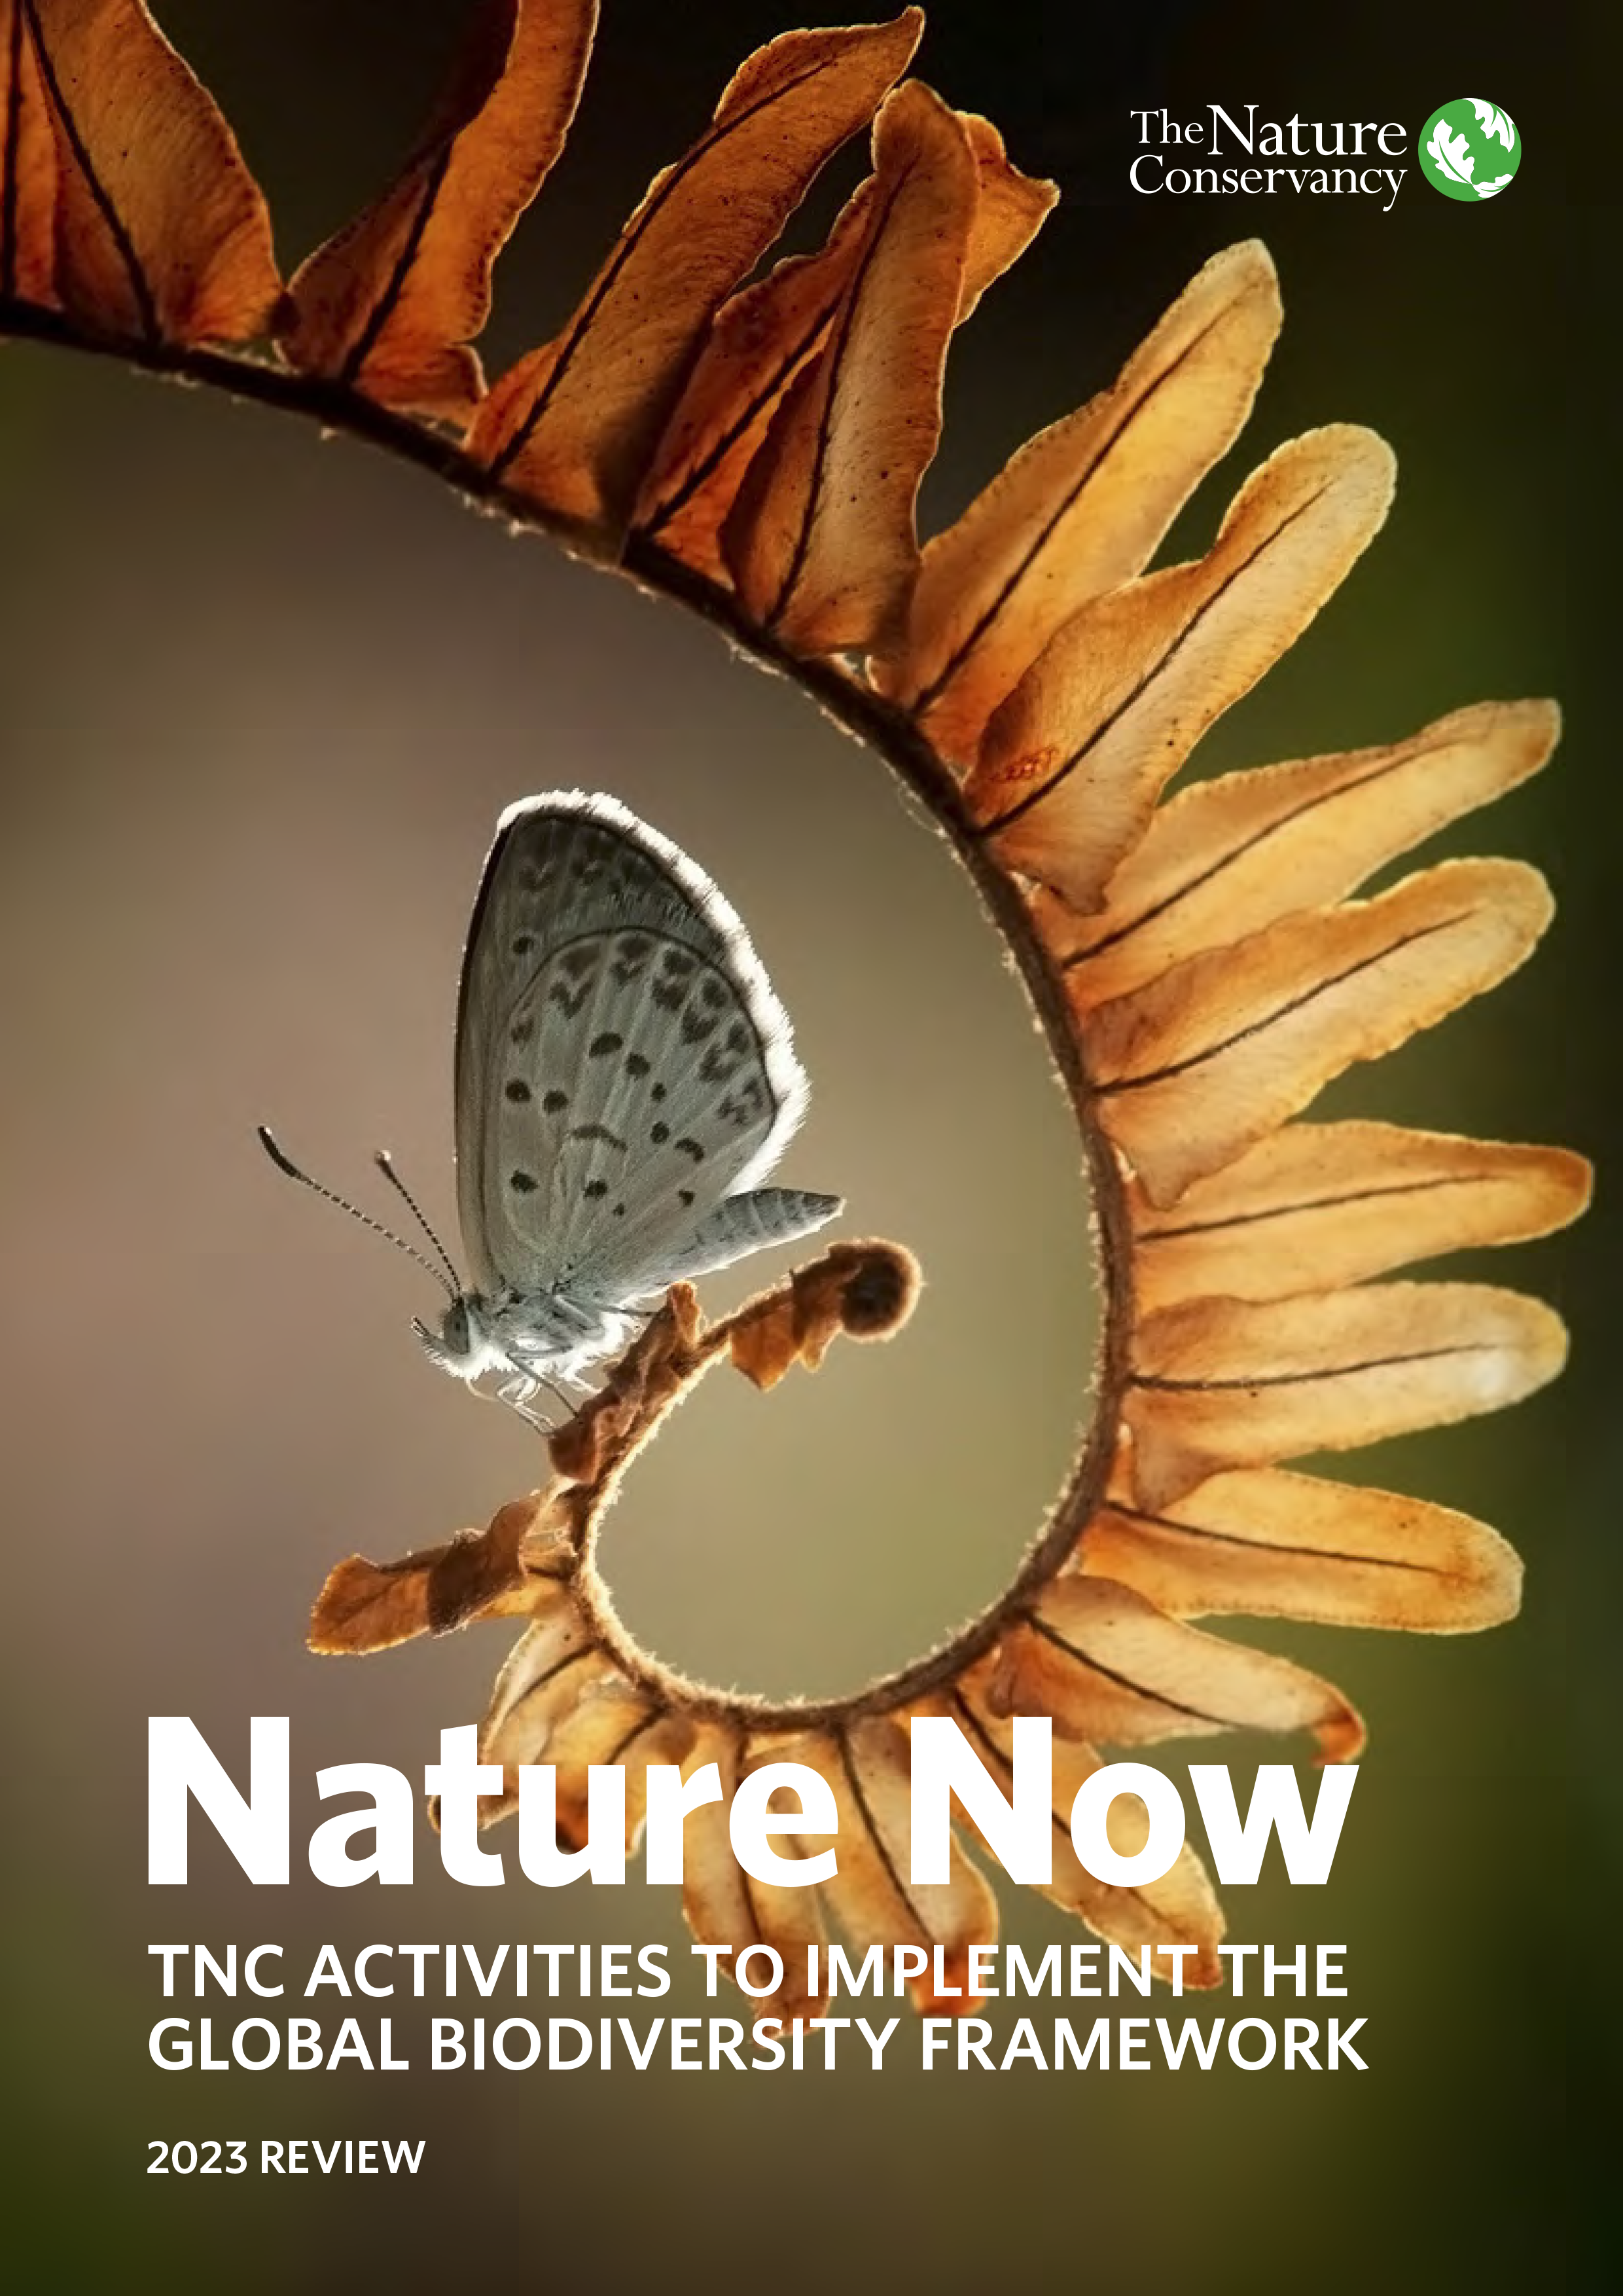 Cover of the Nature Now report showing a closeup of a moth on a dried, curled leaf.